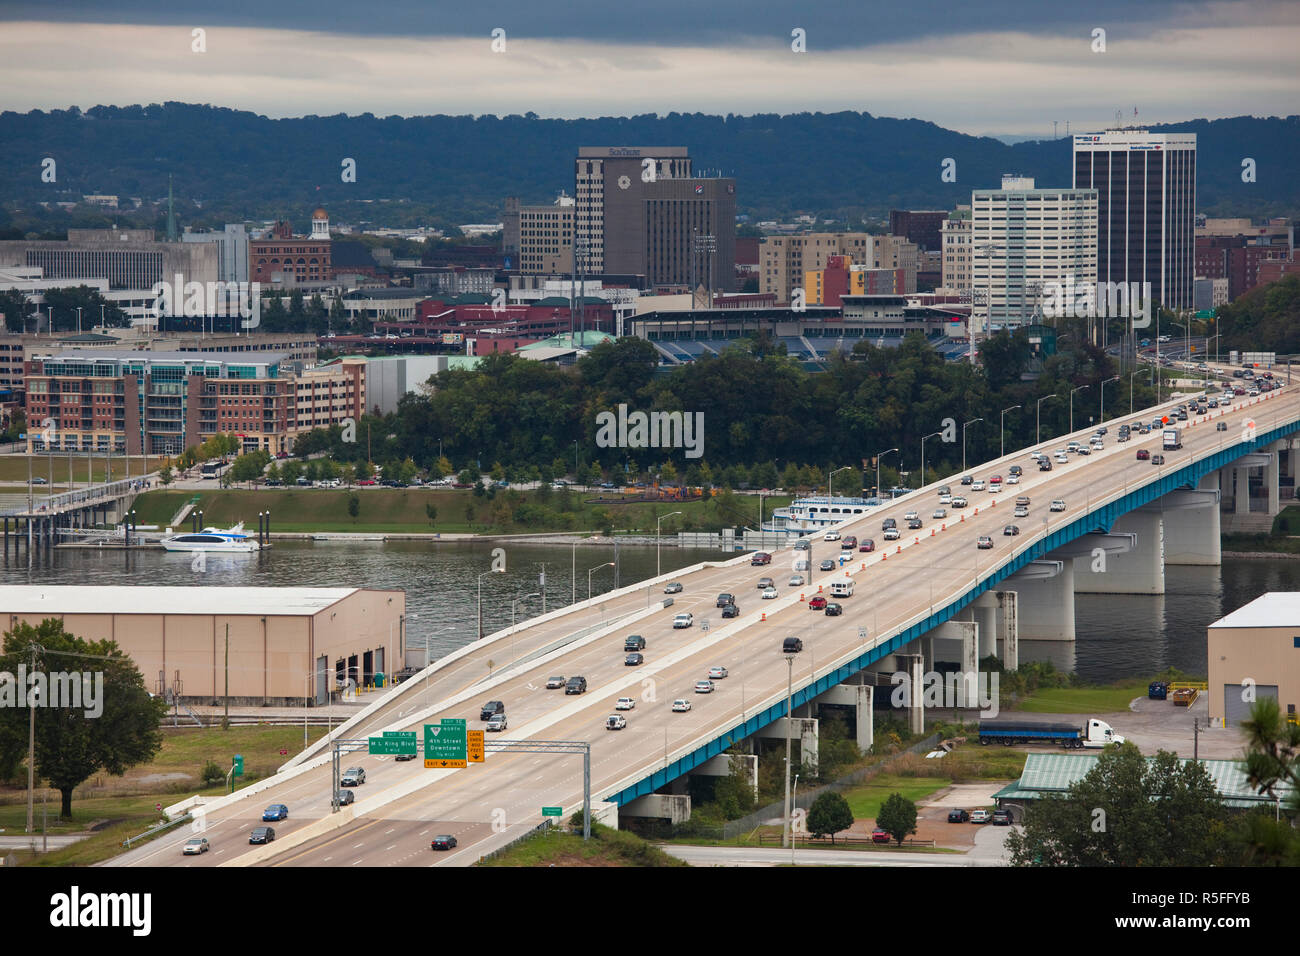 USA, Tennessee, Chattanooga, view of city and Rt. 27 Stock Photo